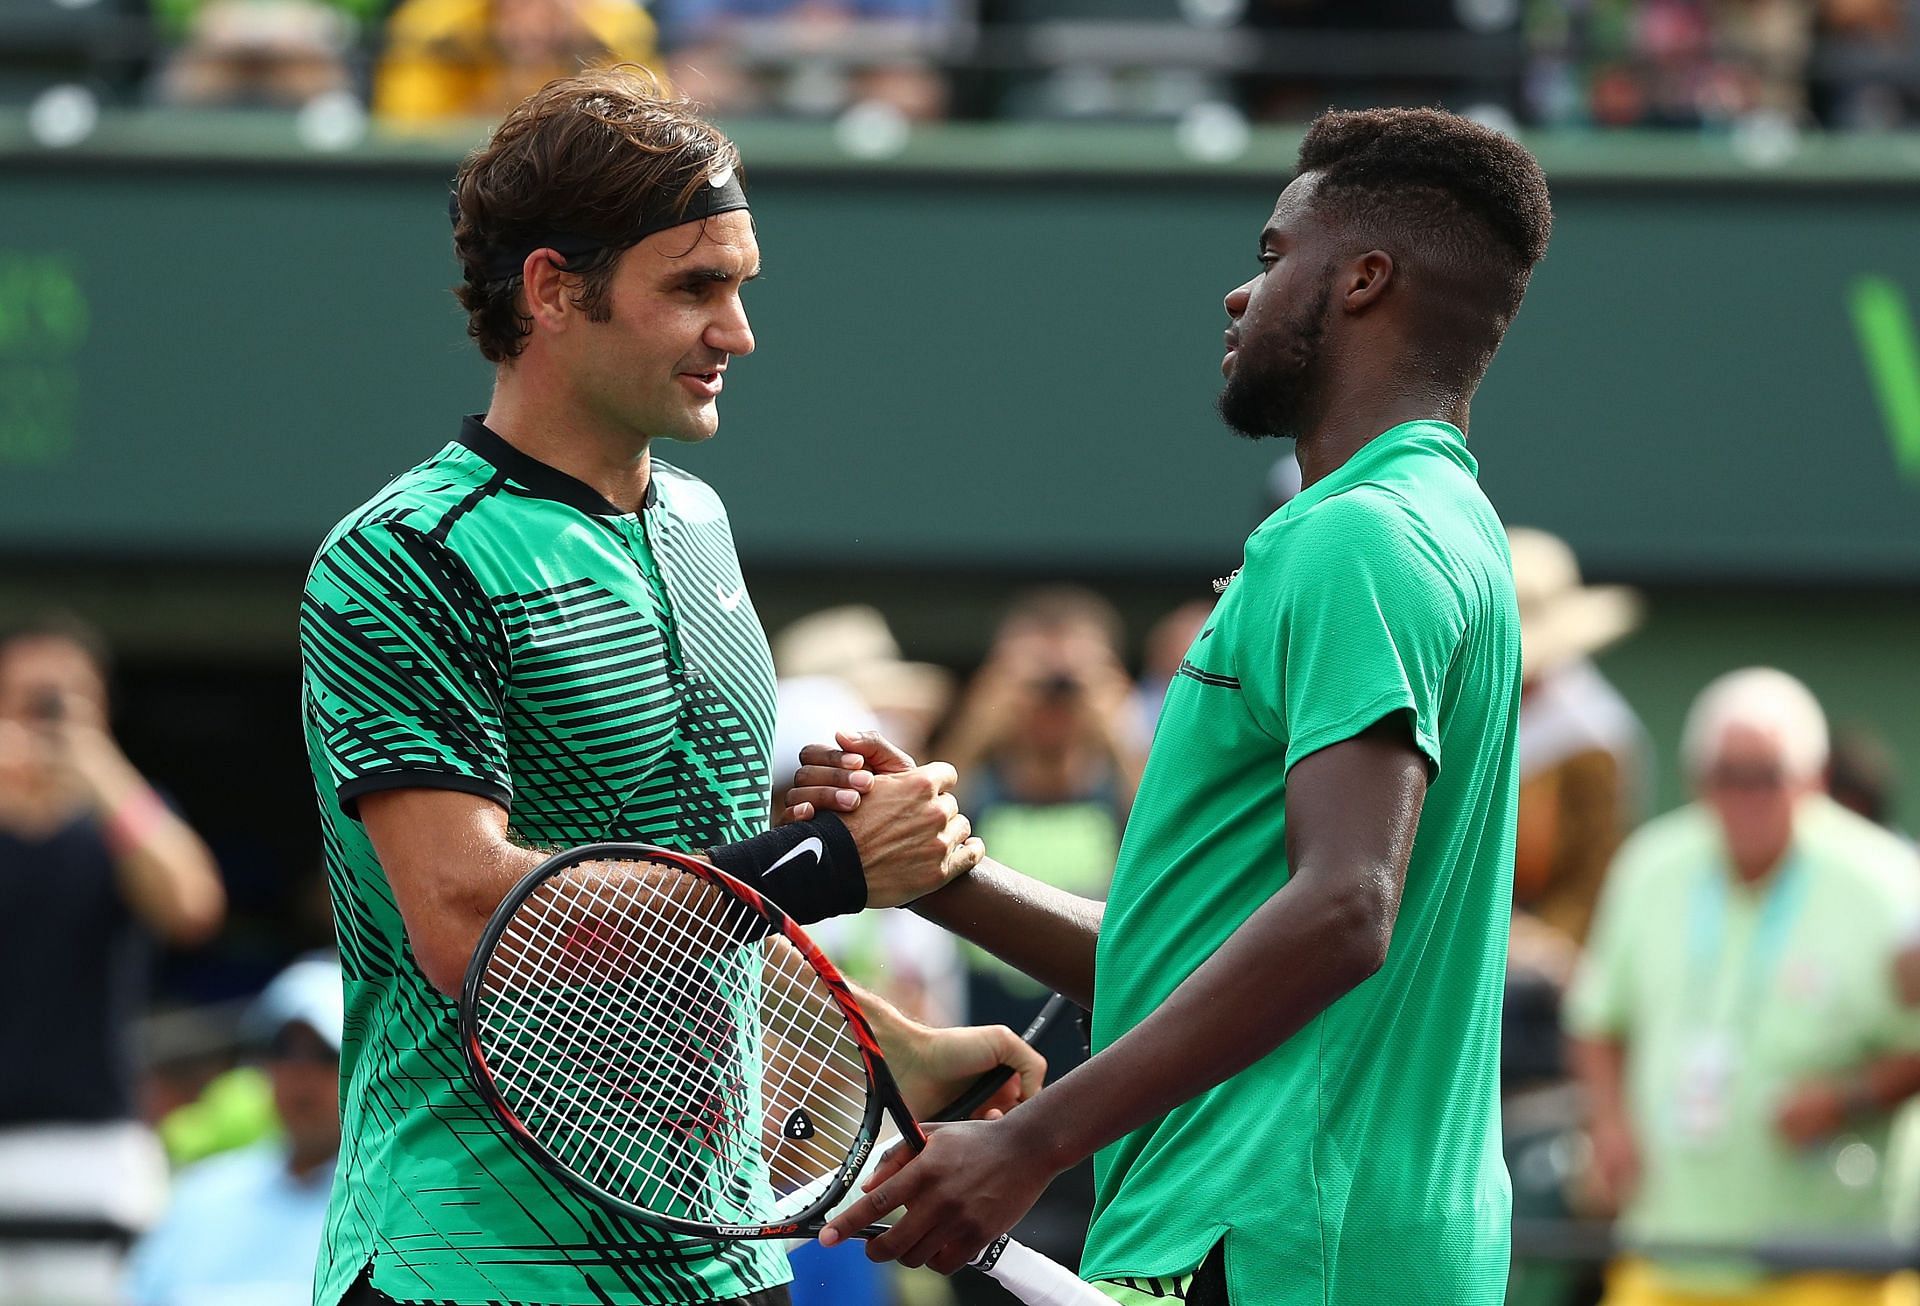 Frances Tiafoe was of the opinion that Roger Federer had a special &quot;aura&quot; about him